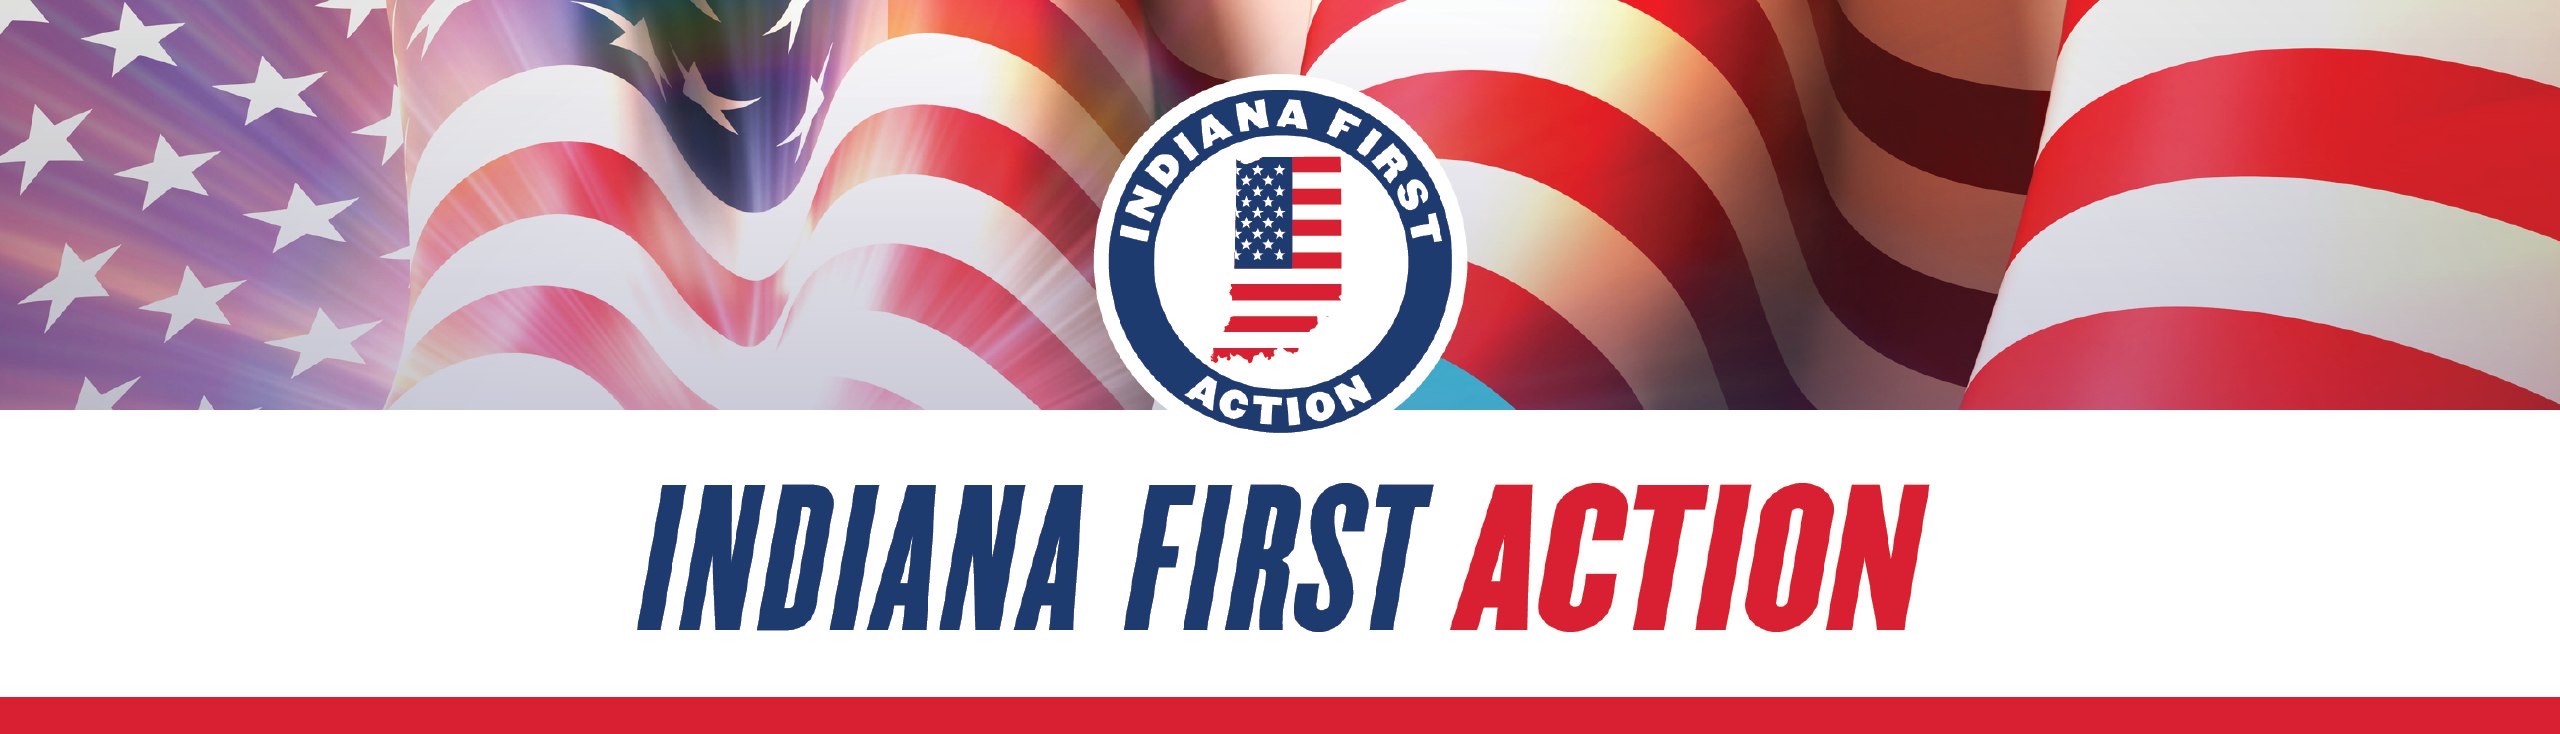 Indiana First Action